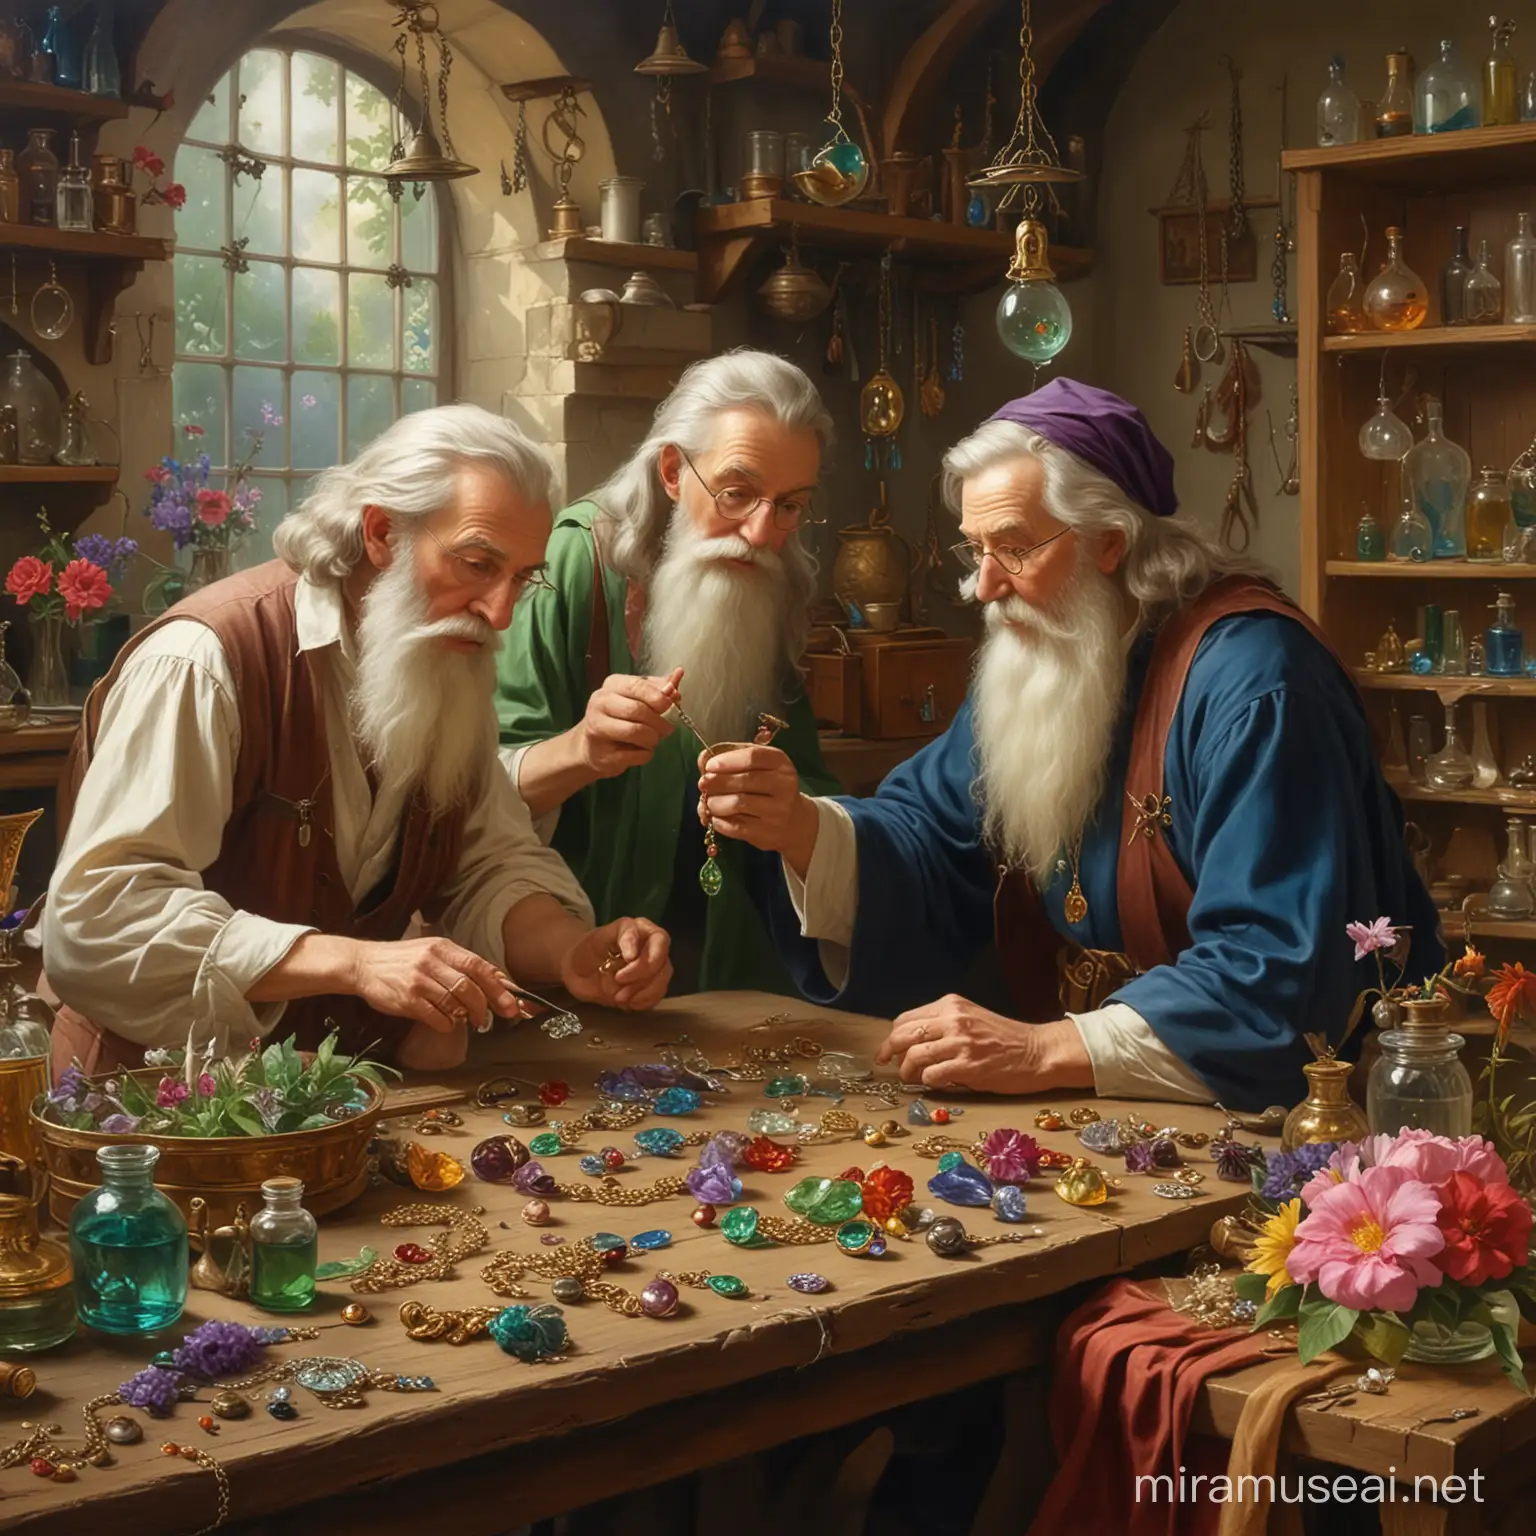 create a oil painting of wizards  and alchemists making magical jewelry and floral jewelery, 1940 art